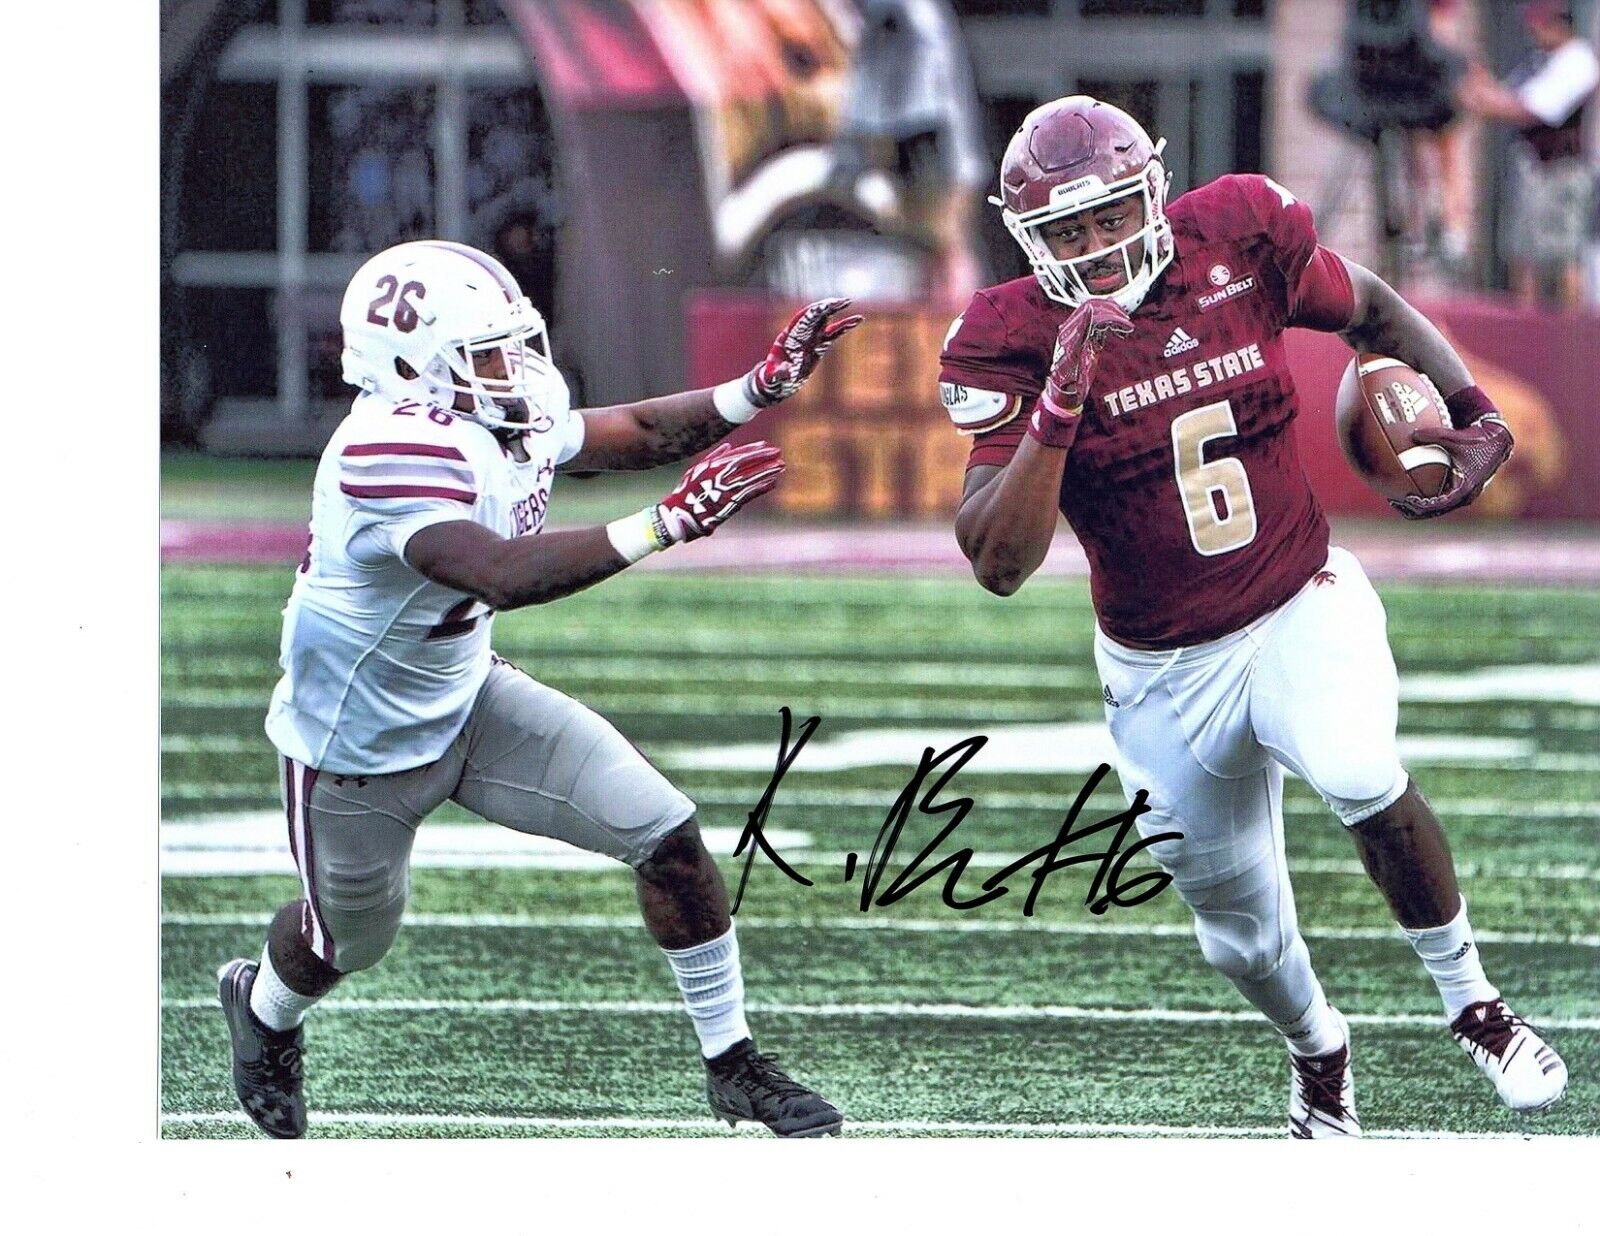 Kenneth Brown Texas State signed autographed 8x10 football Photo Poster painting 2019 NFL Draft!